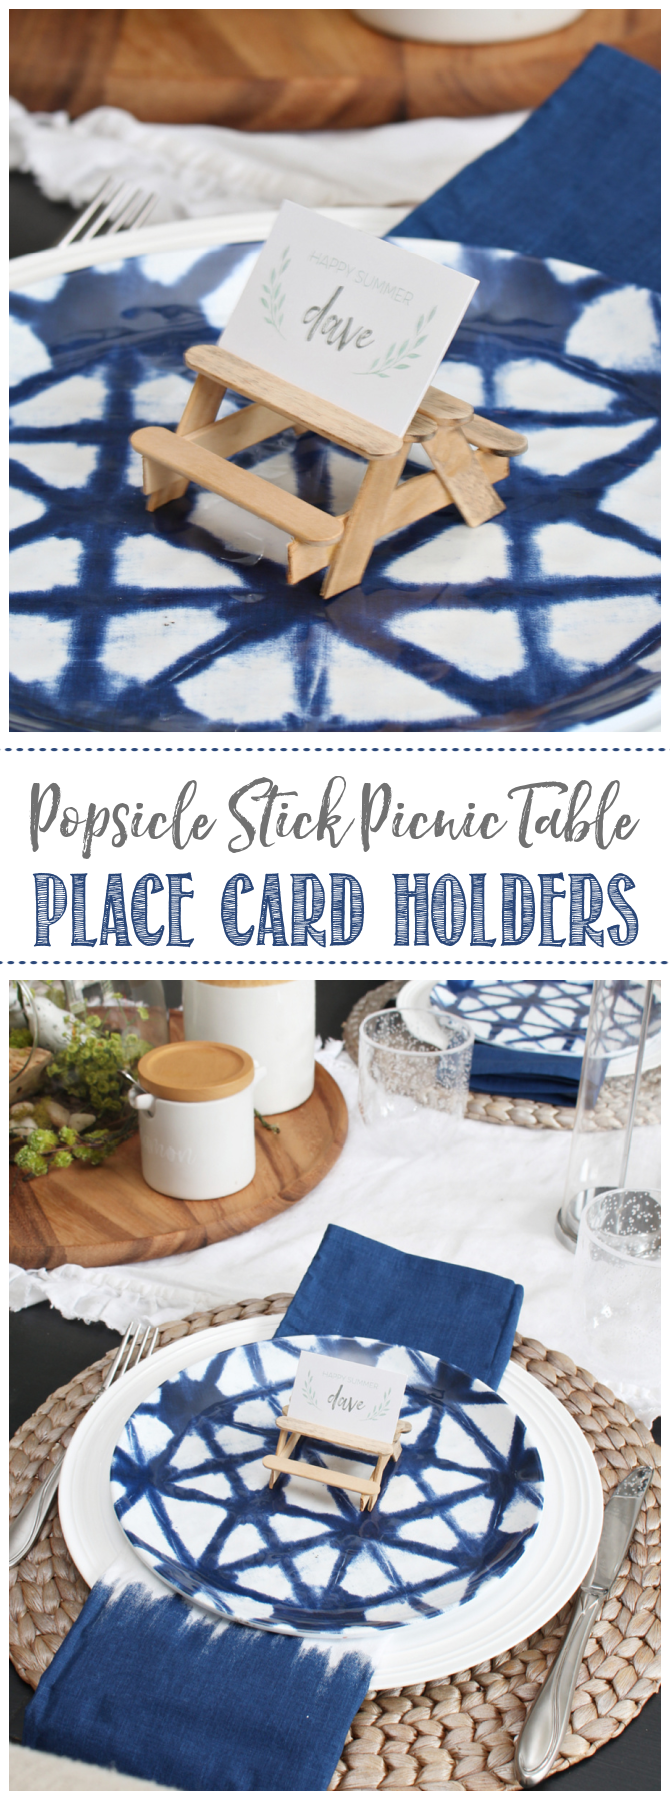 Cute popsicle stick picnic tables used for a place card holder.